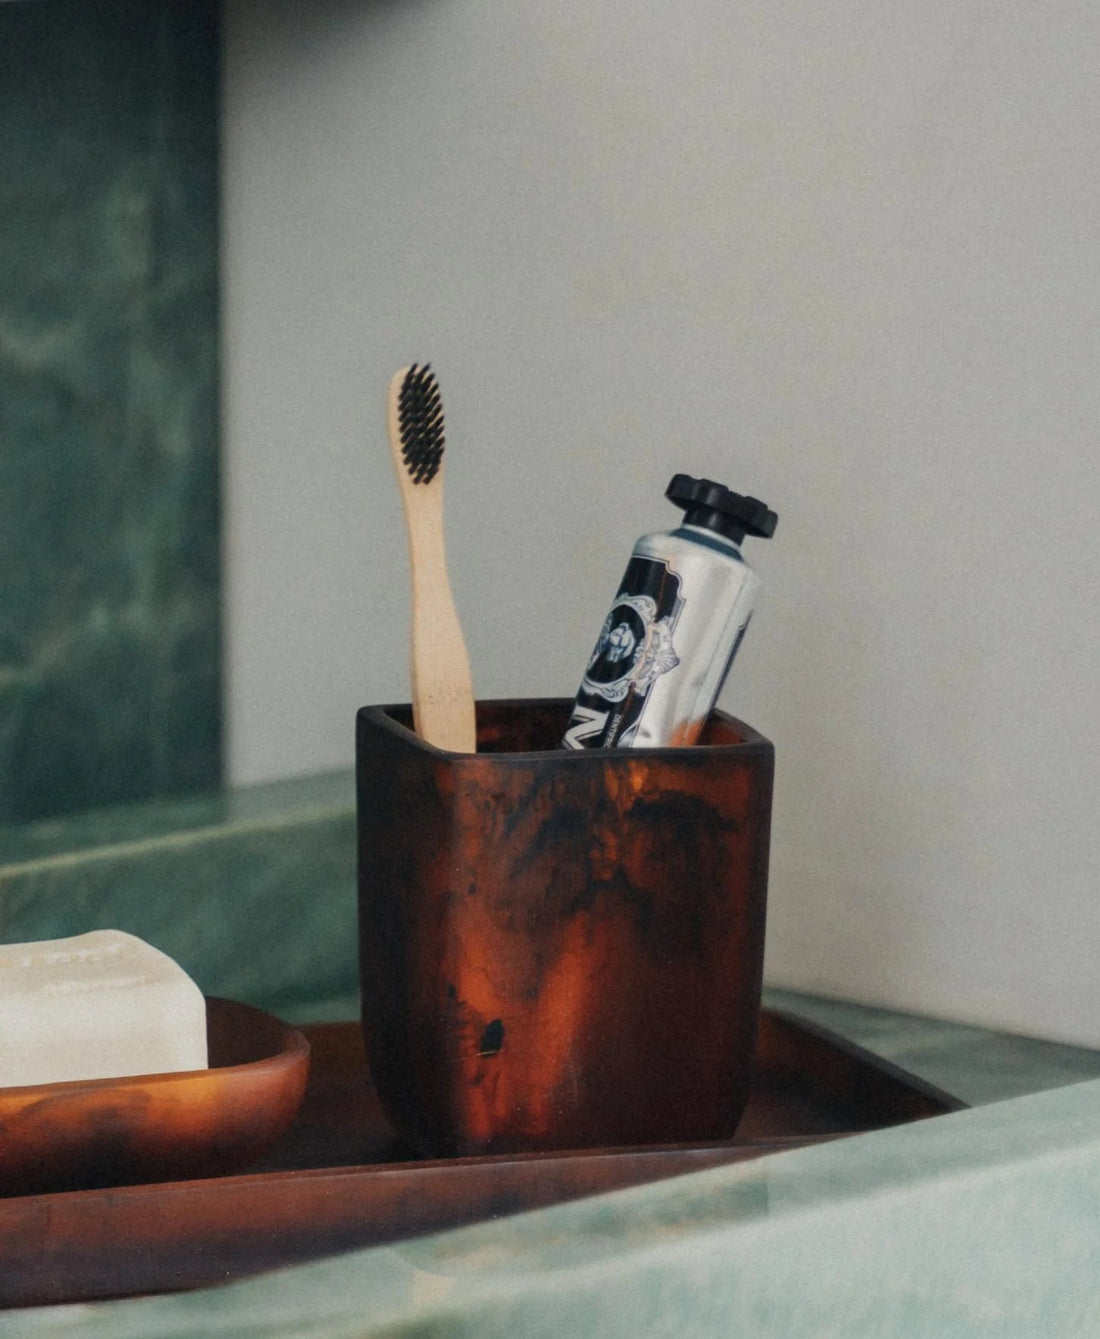 Flow Resin Toothbrush Holder - Earth - The Flower Crate